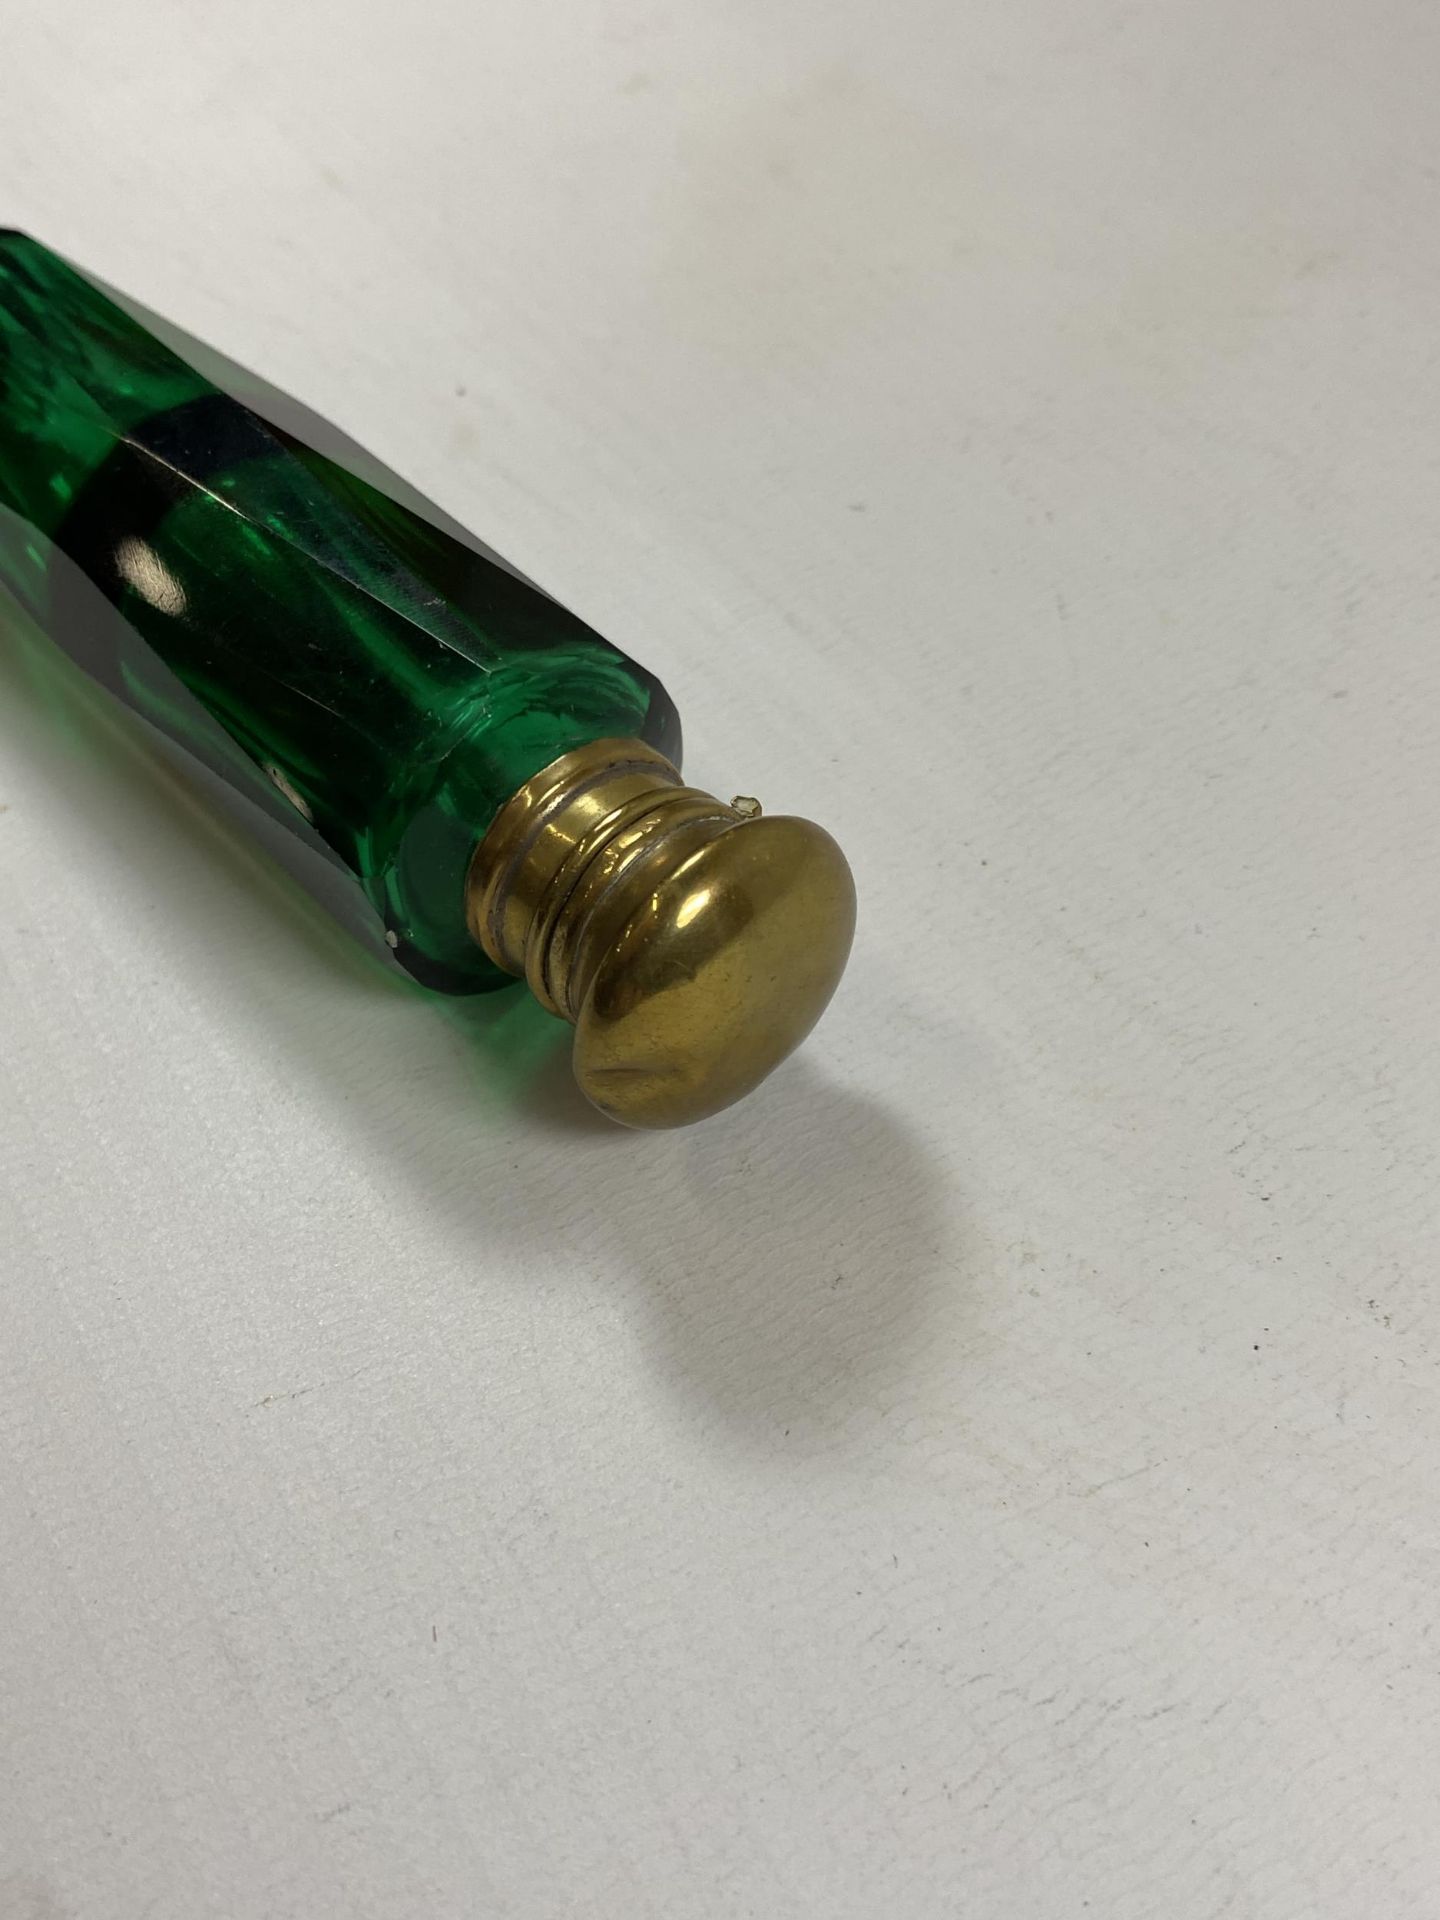 A VINTAGE GREEN GLASS AND BRASS TOPPED DOUBLE SIDED PERFUME BOTTLE - Image 2 of 4